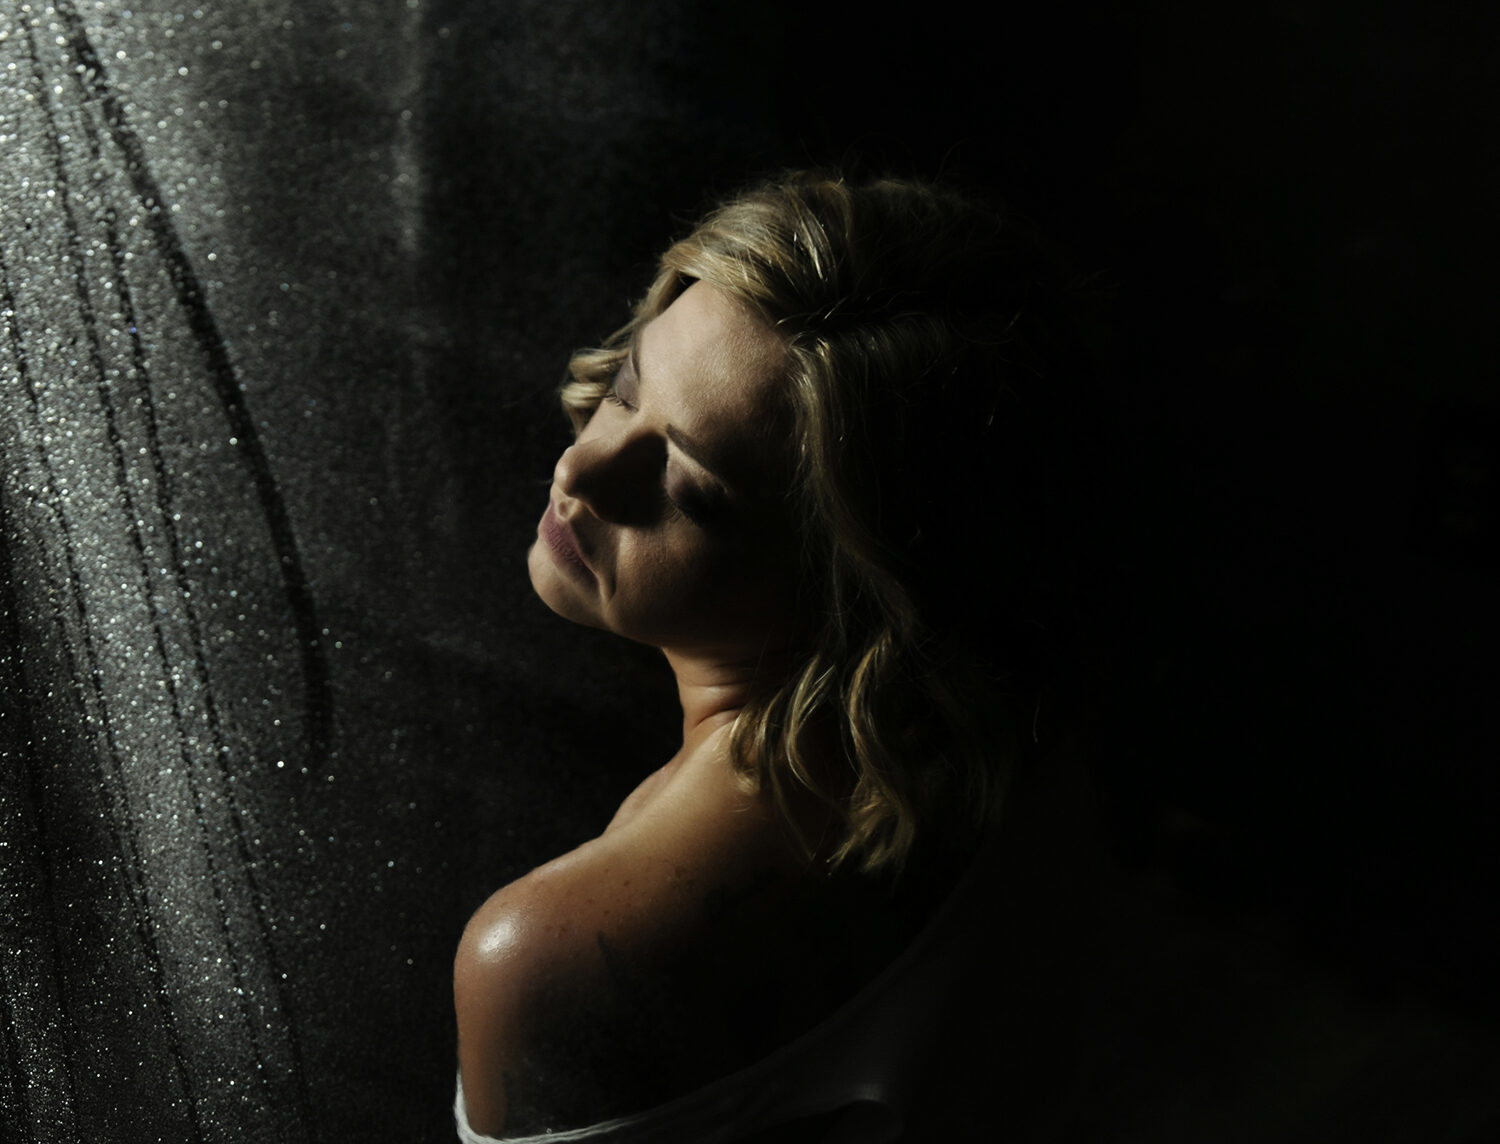 A woman in a white shirt coming off her shoulder sits in a studio behind a wet glass door after using chicago bachelorette party planner